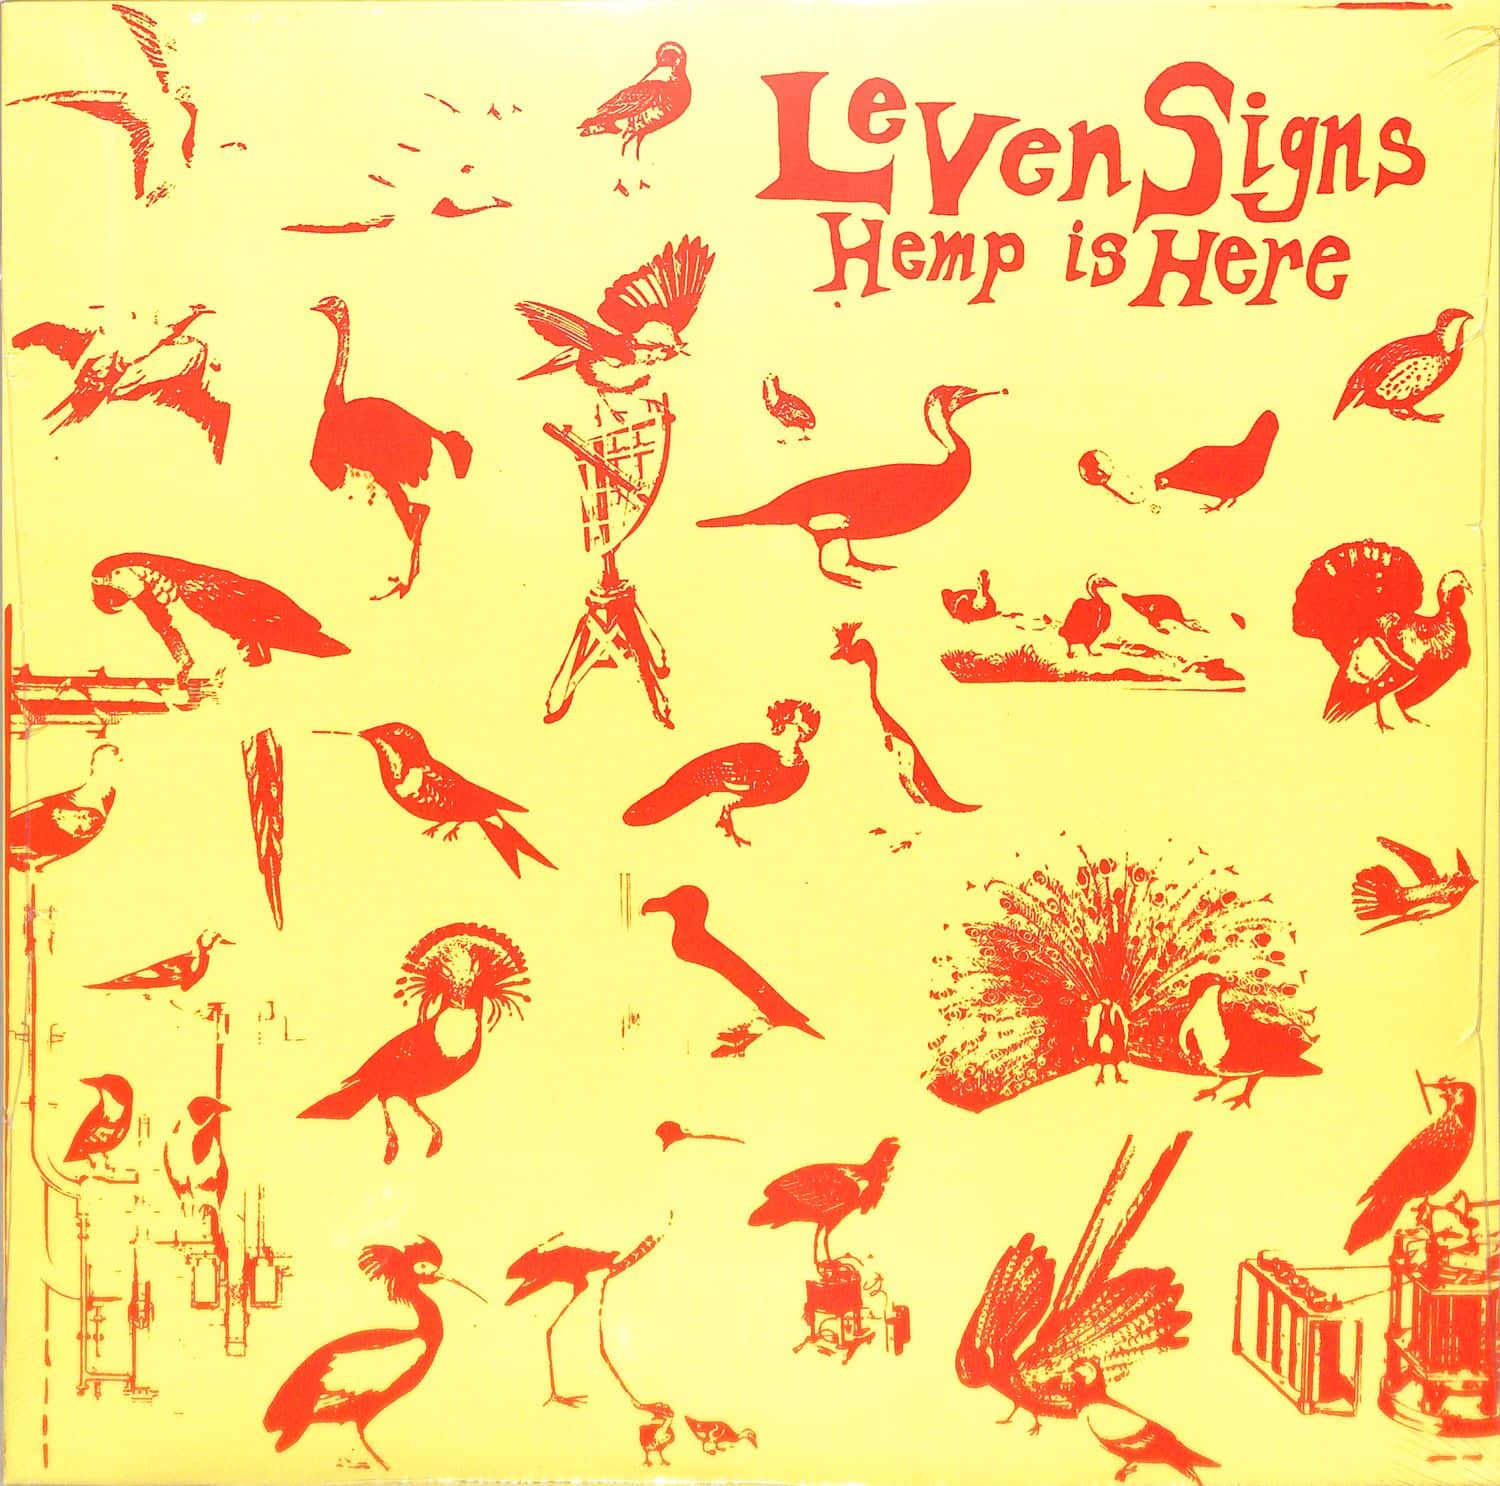 Leven Signs - HEMP IS HERE